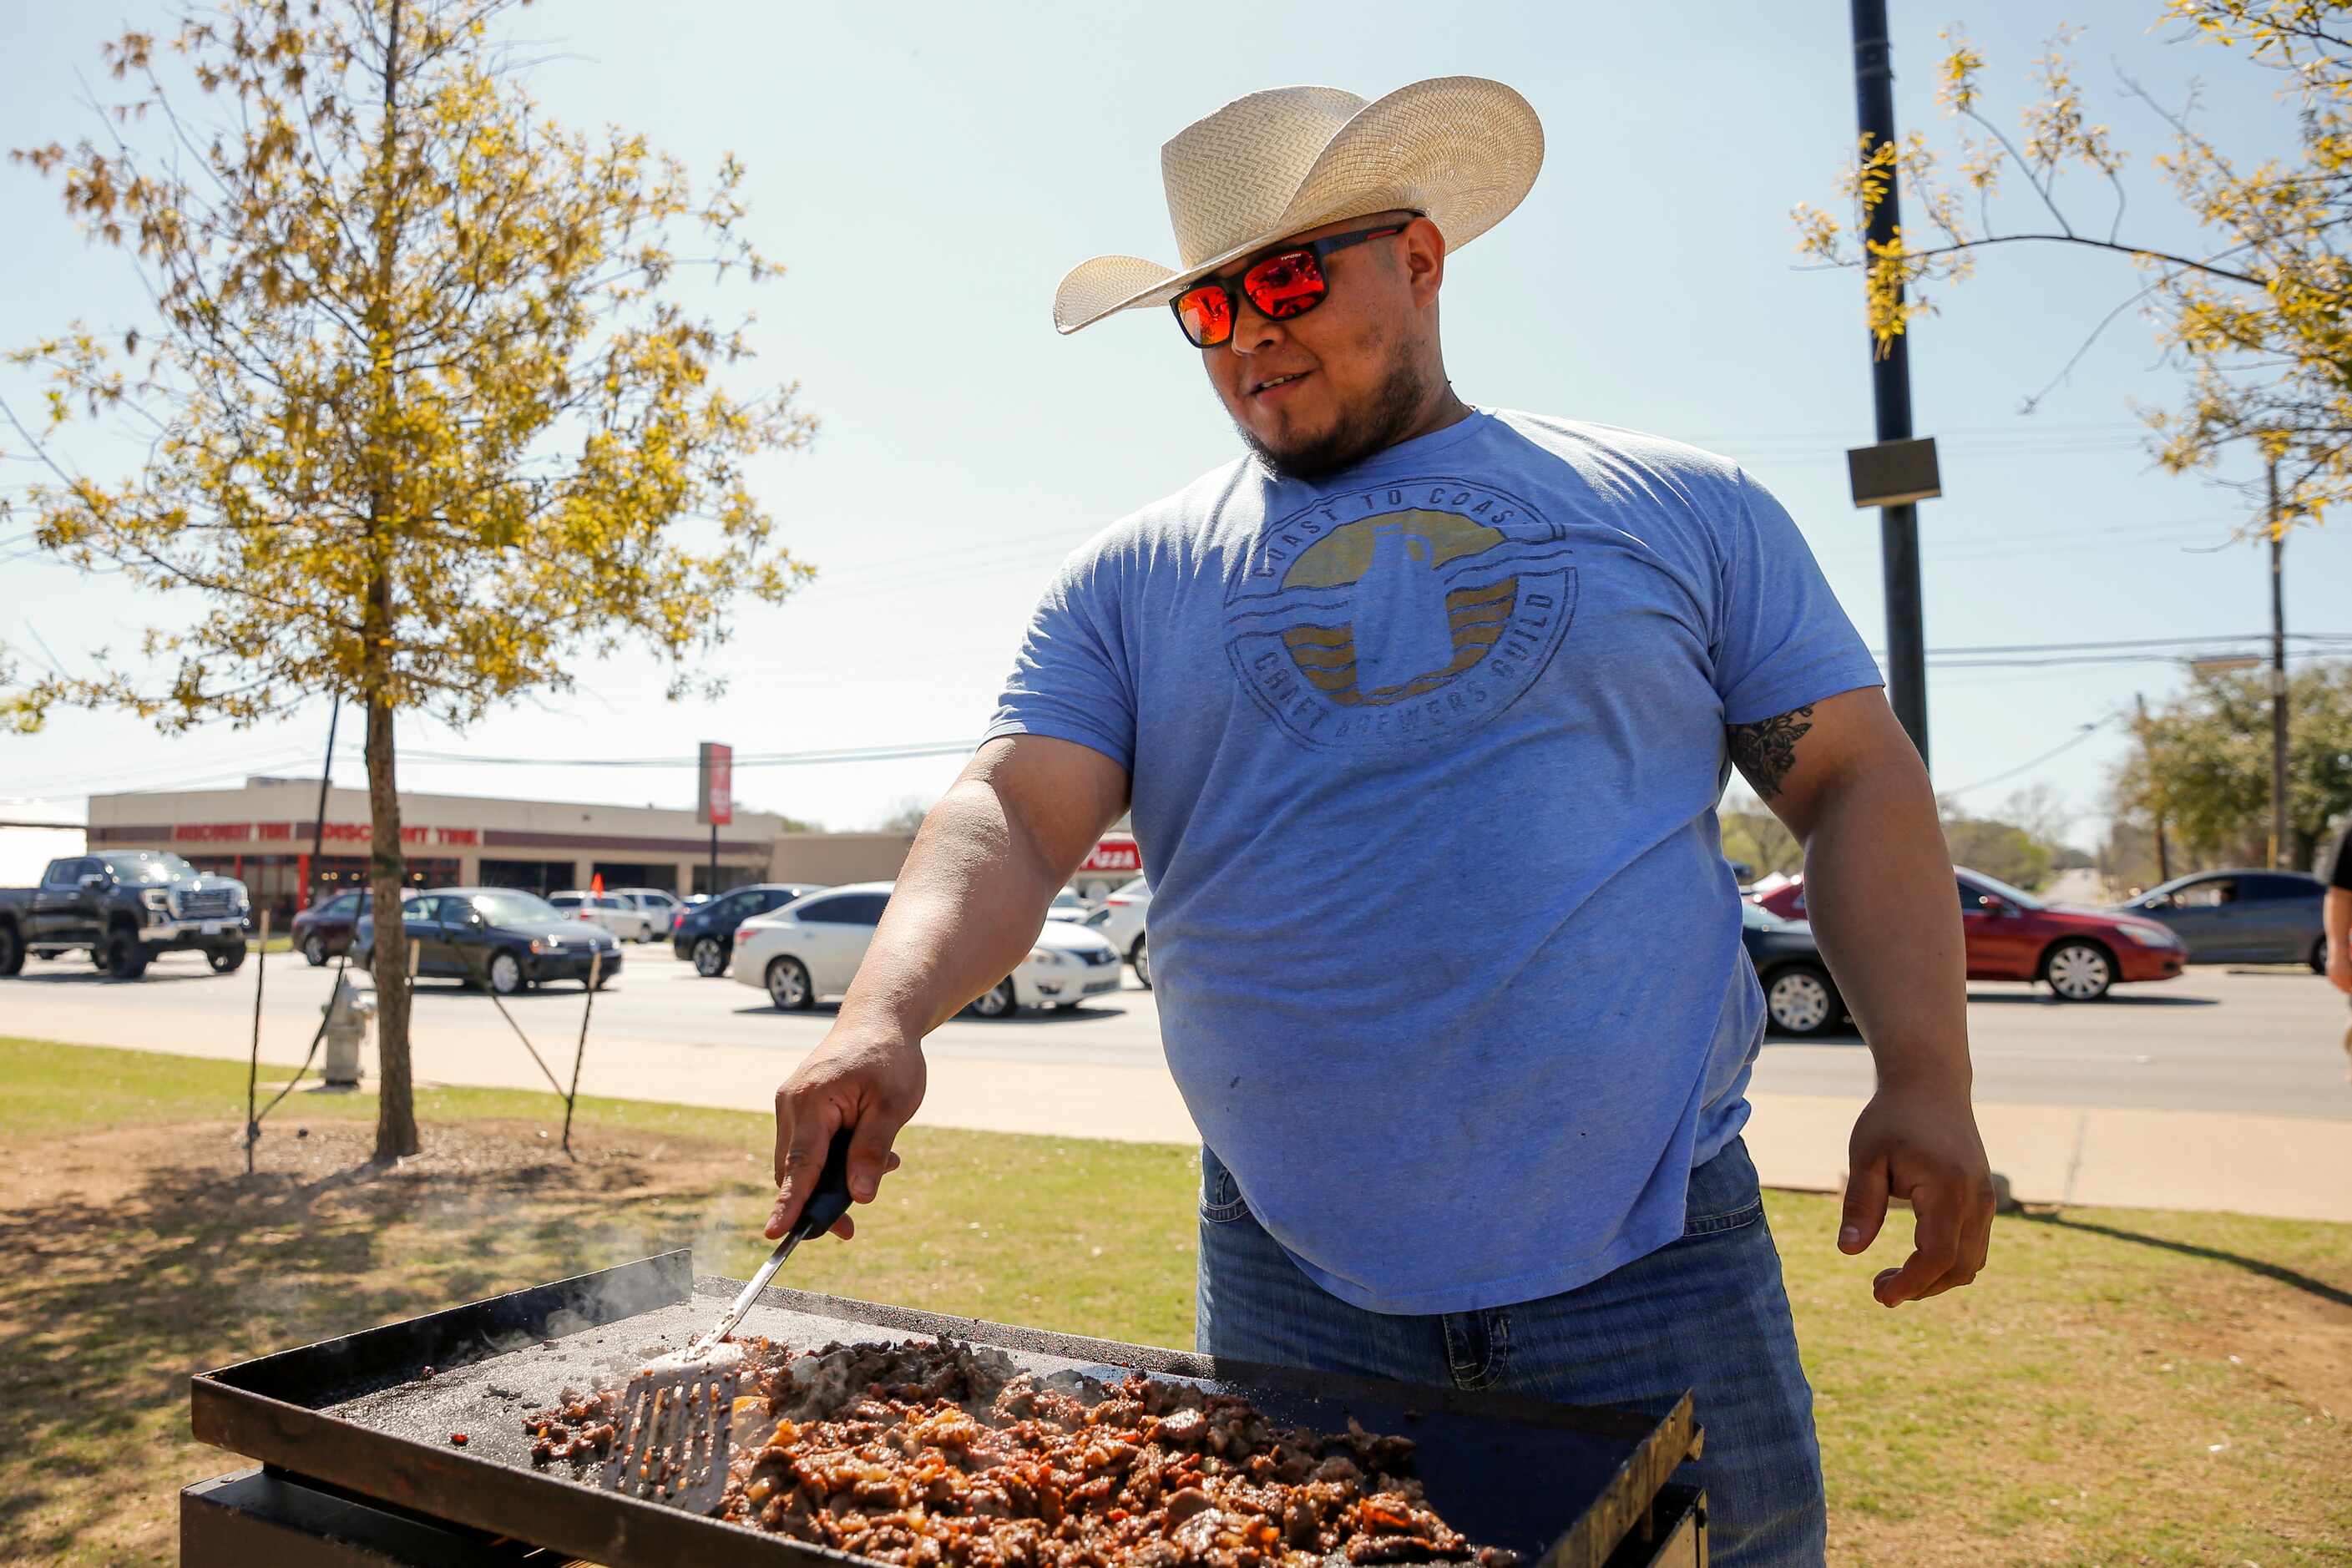 Mauricio Vargas, 29, of Midloathian, Texas tends to his grill while tailgating before...